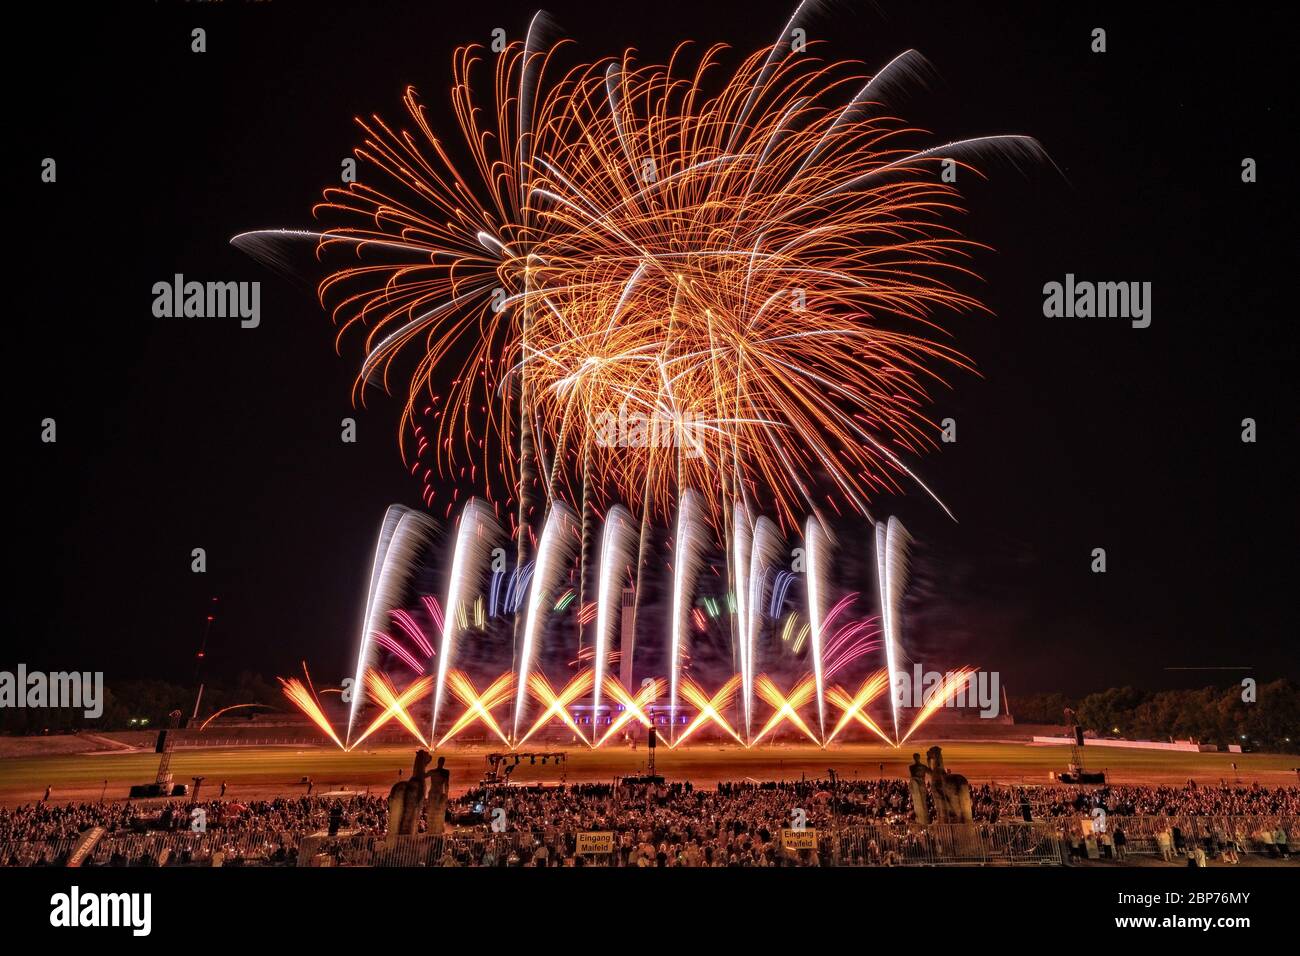 North Star Fireworks (Norwegen), Fireworks at the highest level, showdown of the Koenigsklasse at the Pyronale 2019 on the Maifeld in front of the Berlin Olympic Stadium. Stock Photo